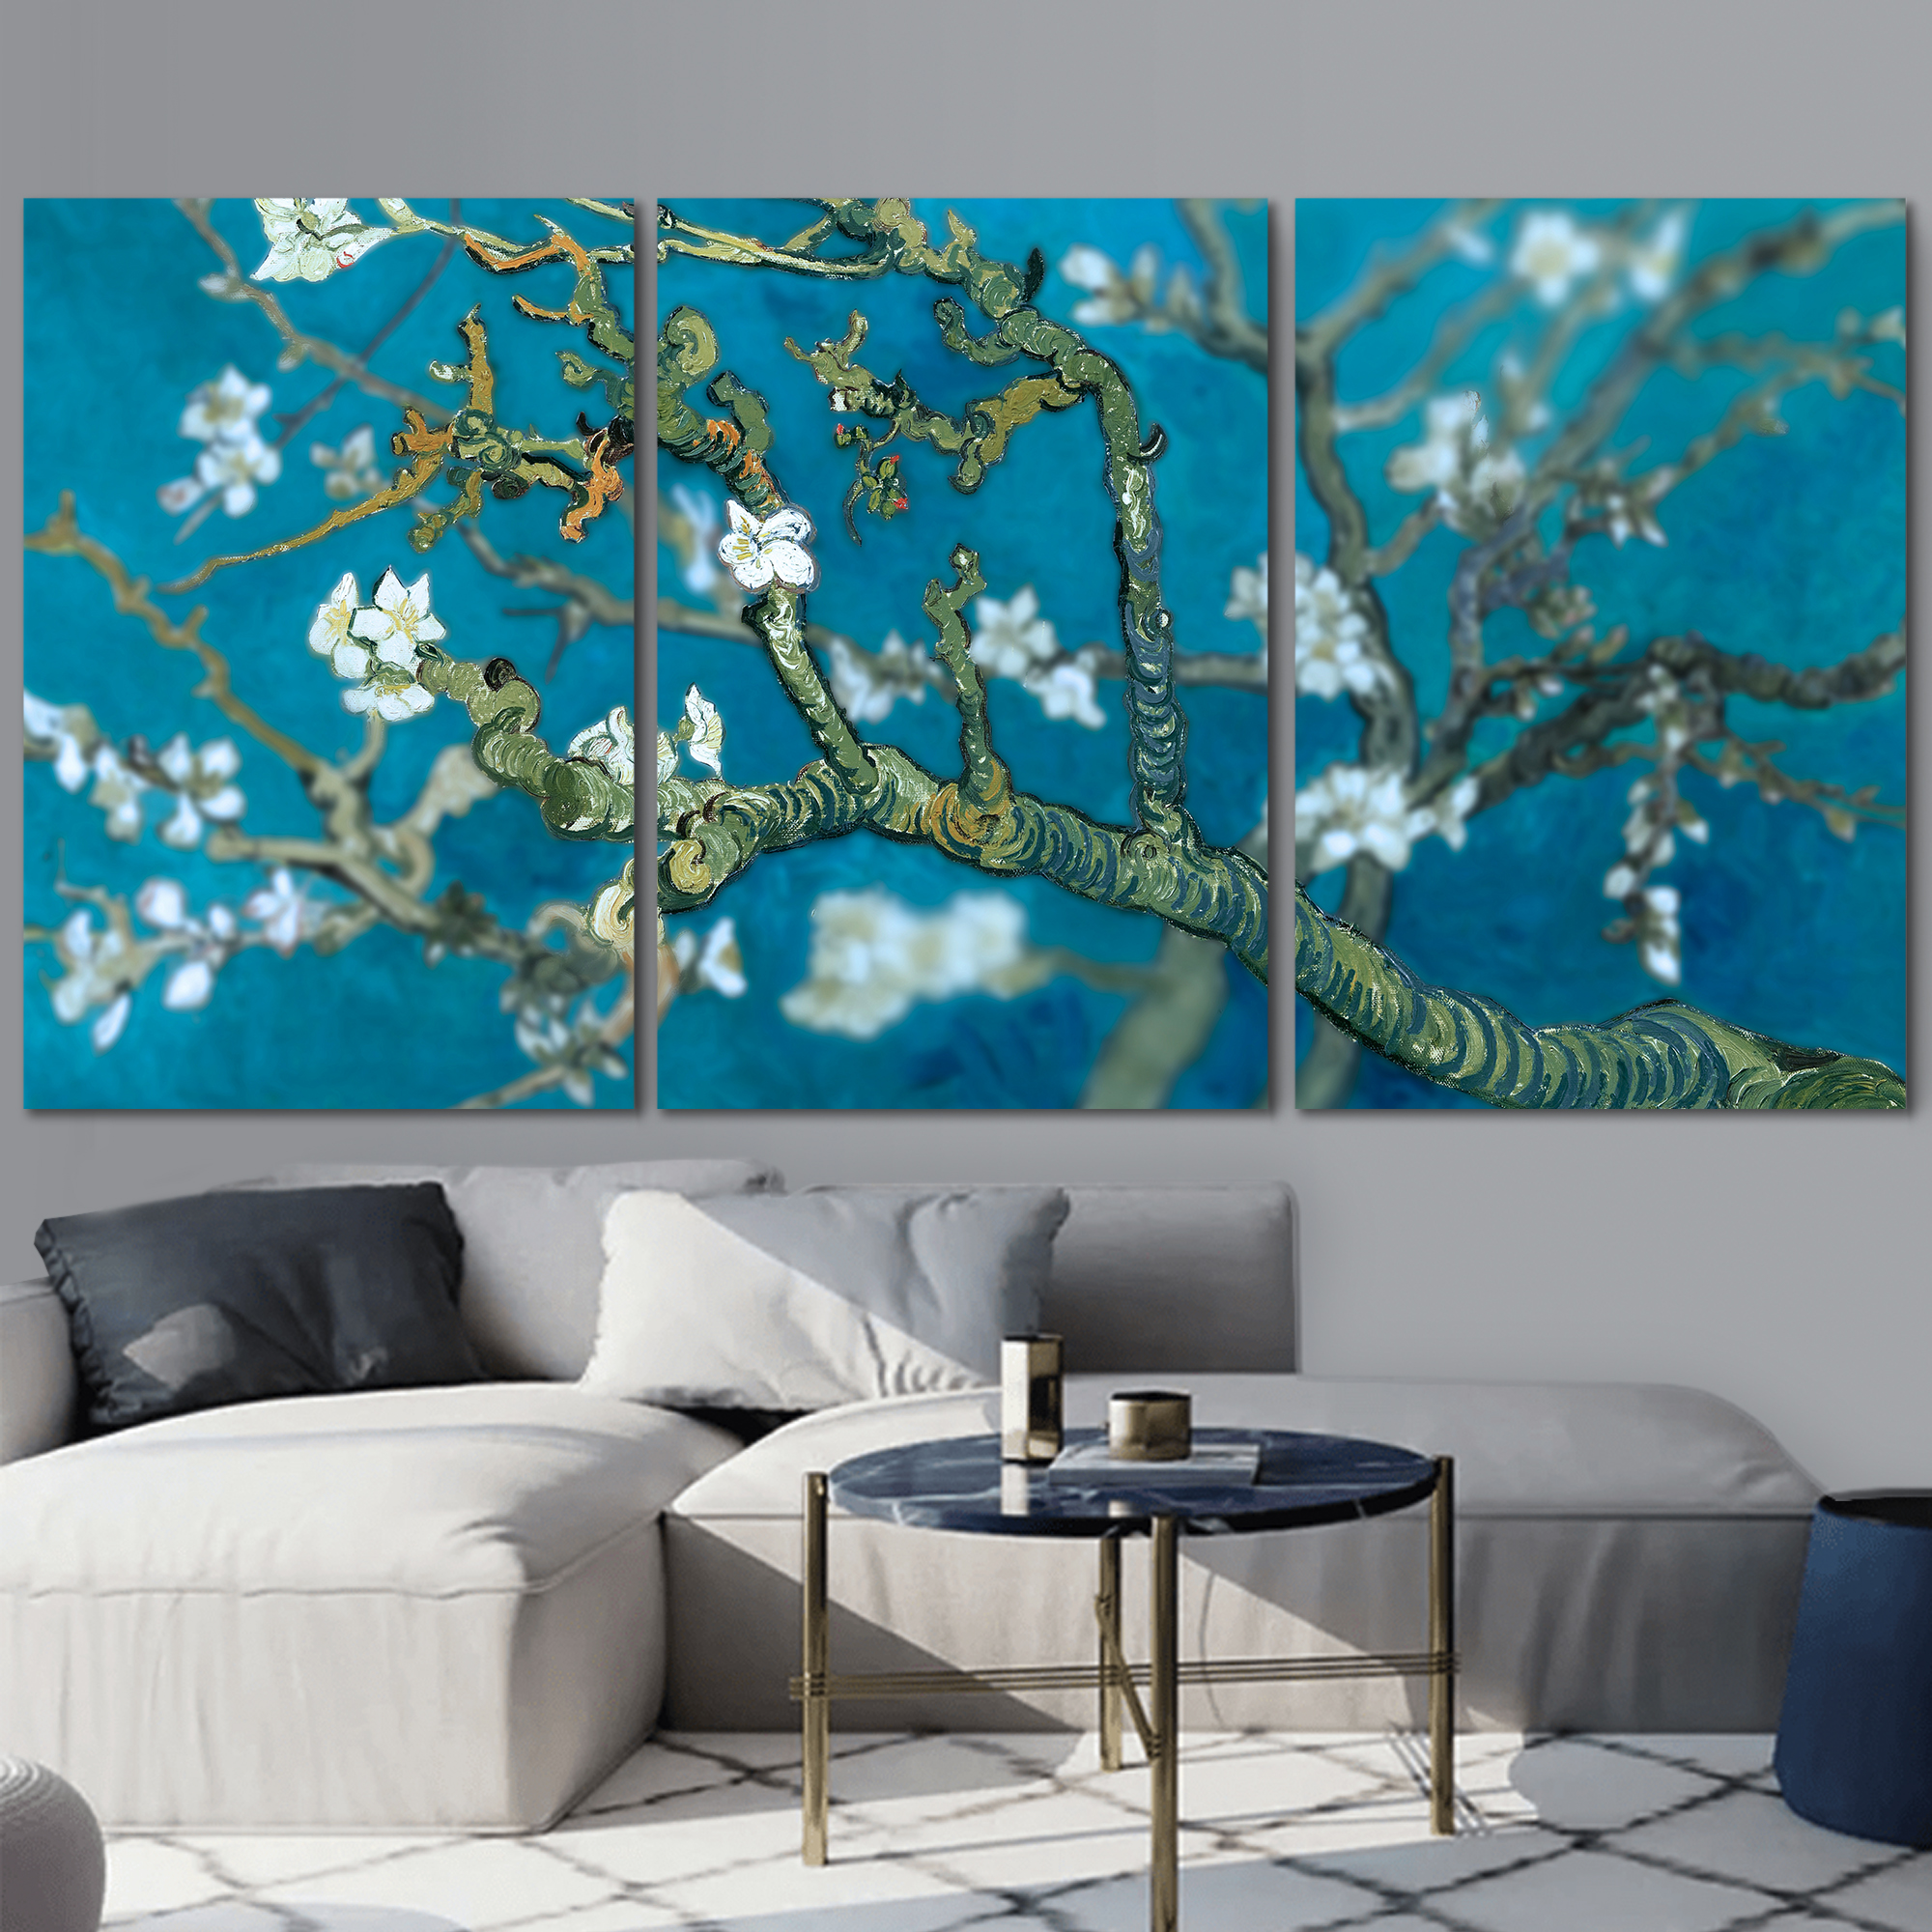 Set Of 3 Flowers Blossom Stretched Canvas Print Framed Wall Art Home Decor F84 